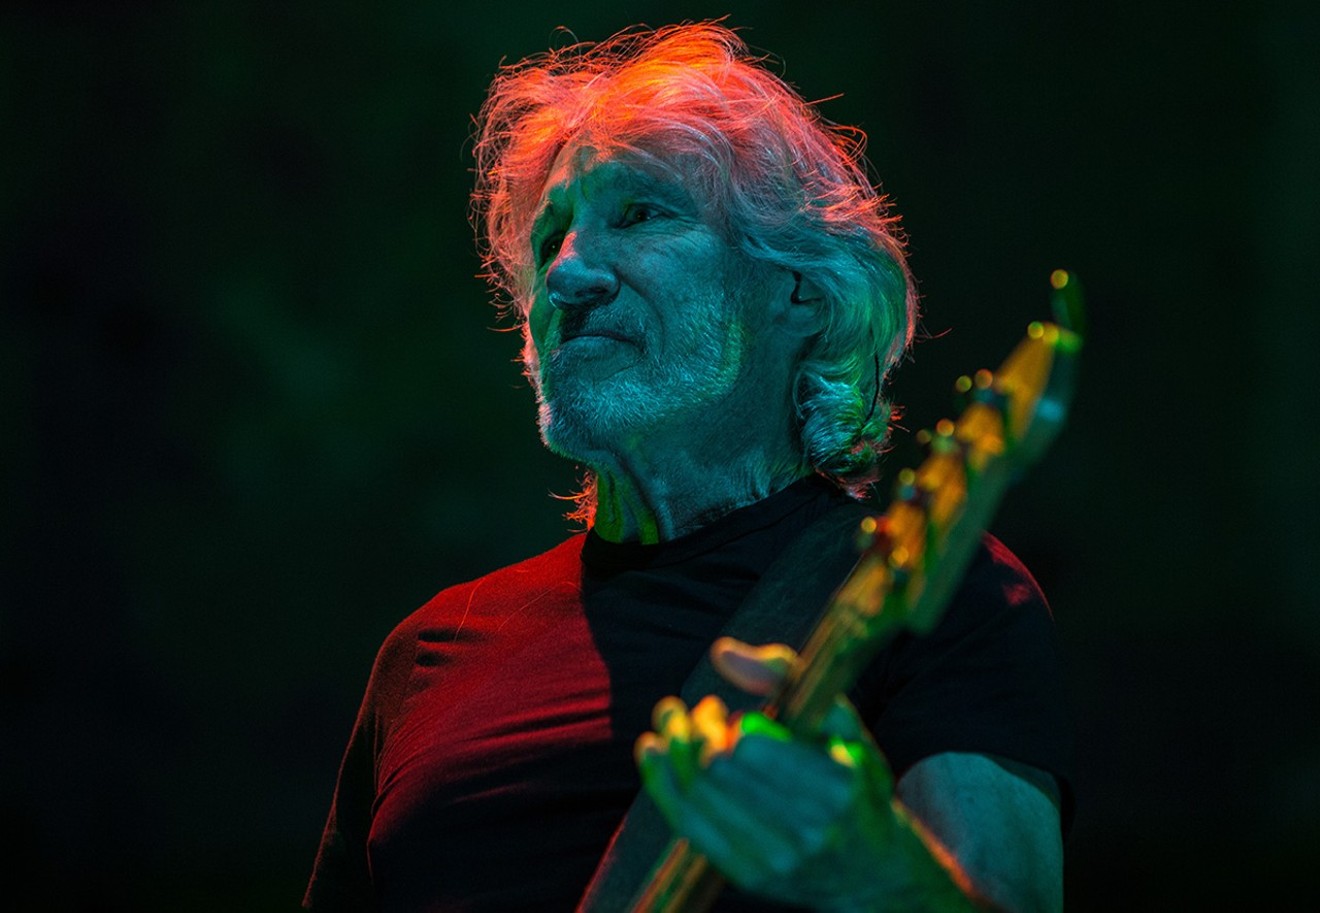 See more photos of Roger Waters' performance at the American Airlines Arena here.